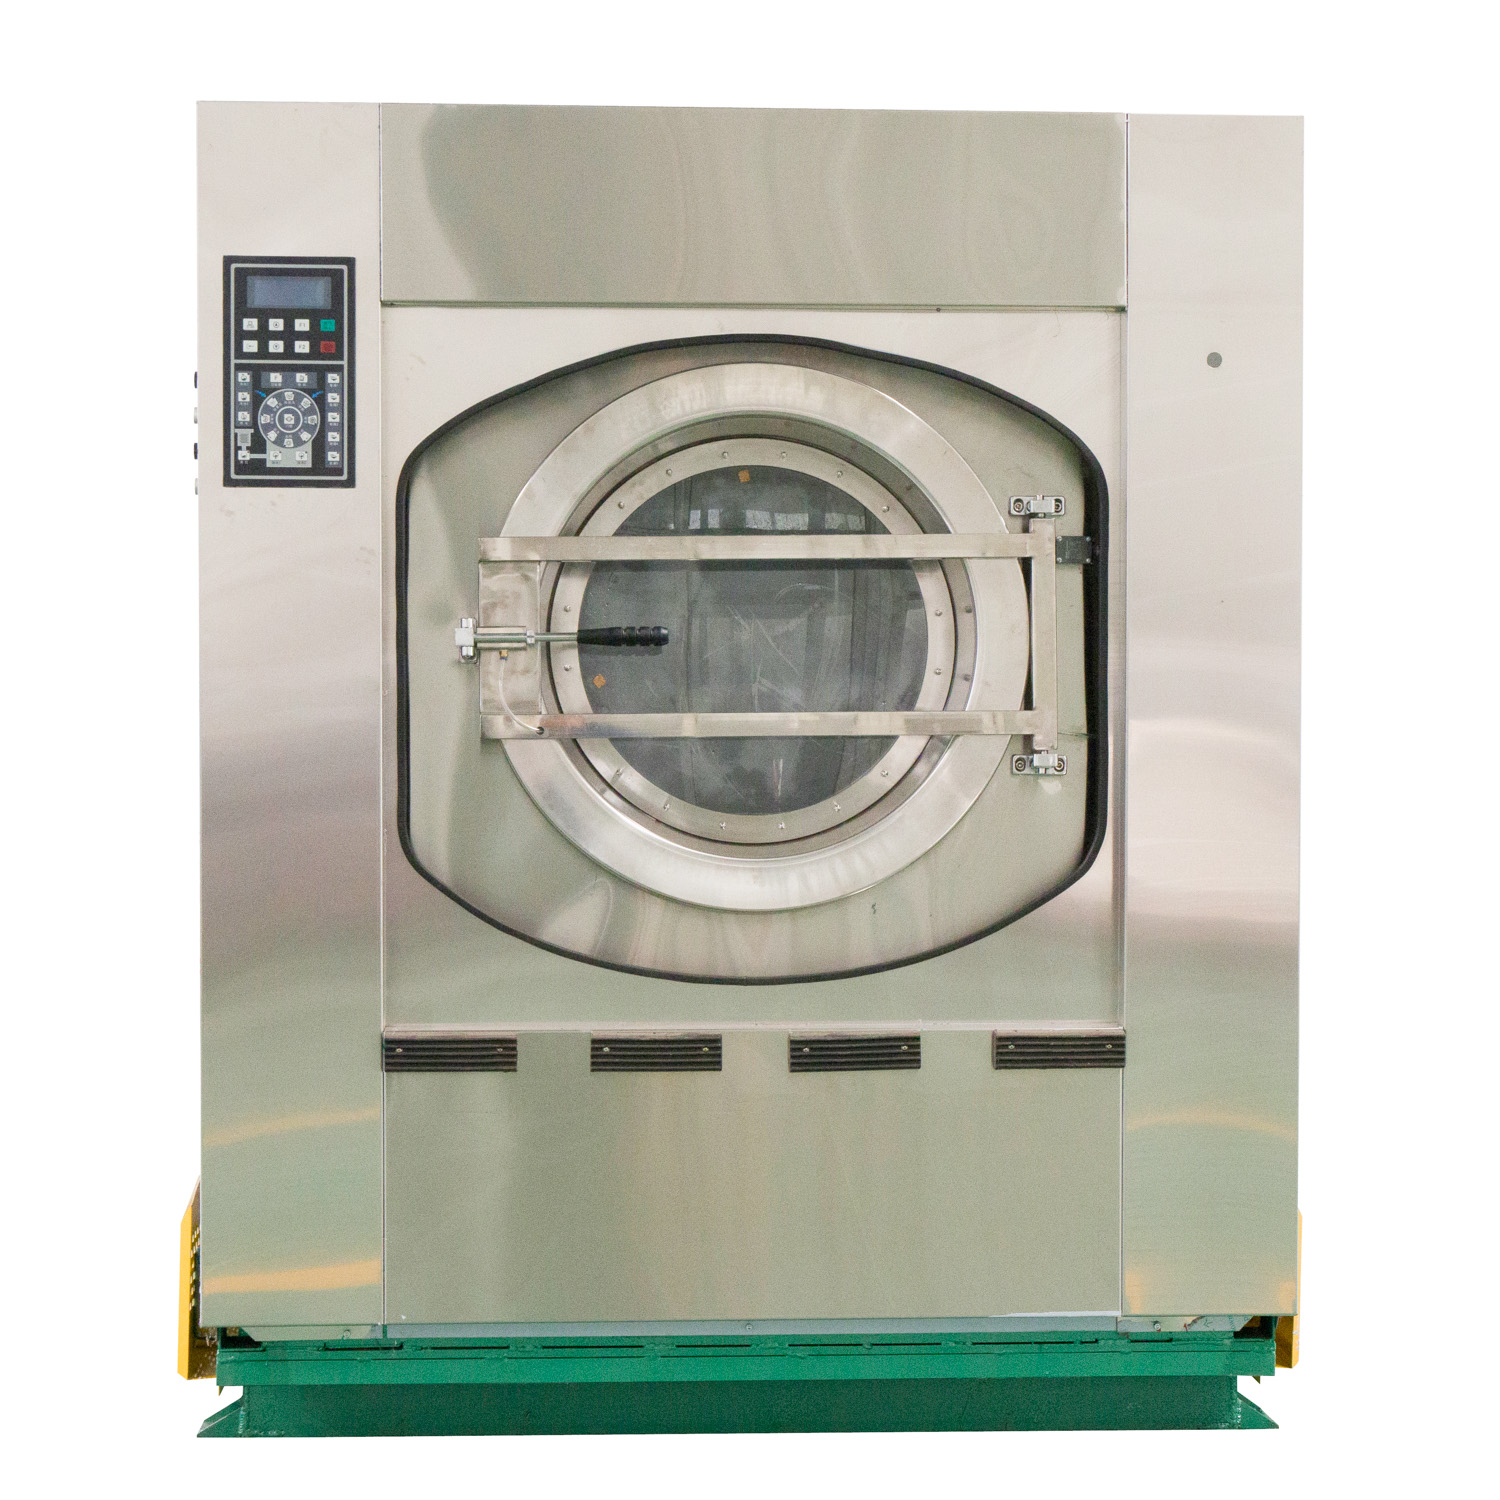 150kgs hotel washer extractor laundry business washer extractor